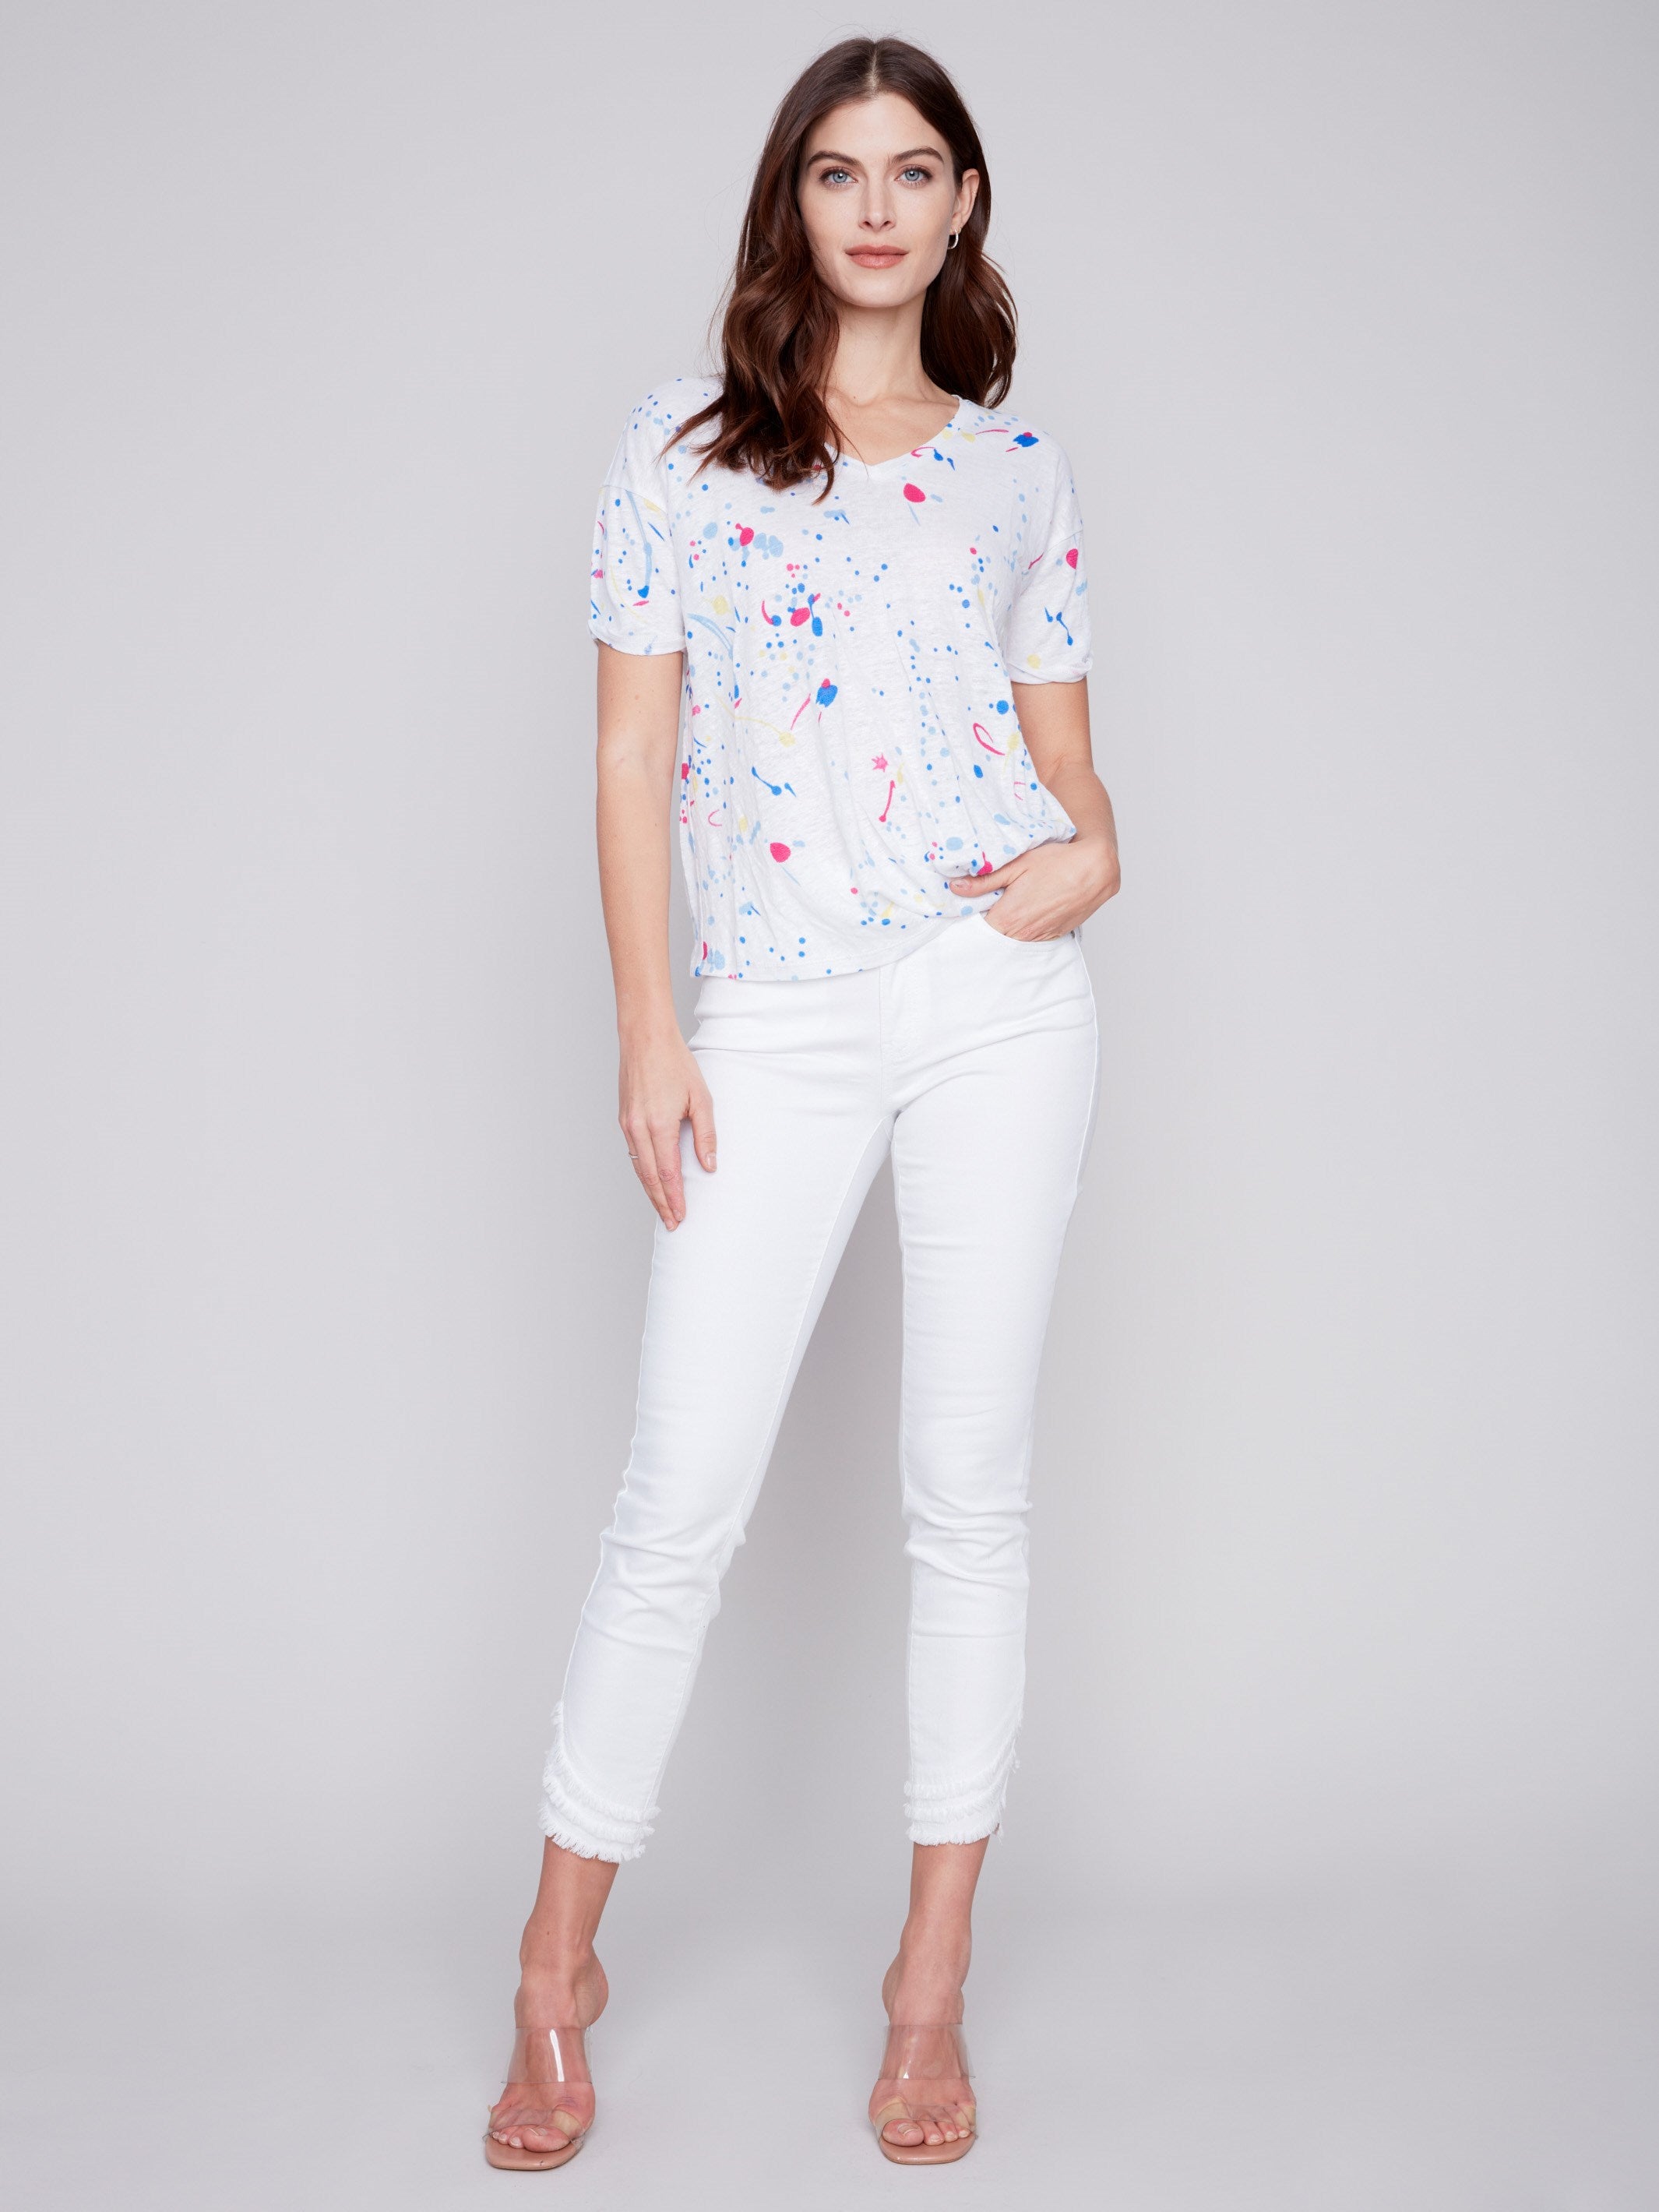 Printed Linen Top With Front Twist Knot - Splash - Charlie B Collection Canada - Image 5